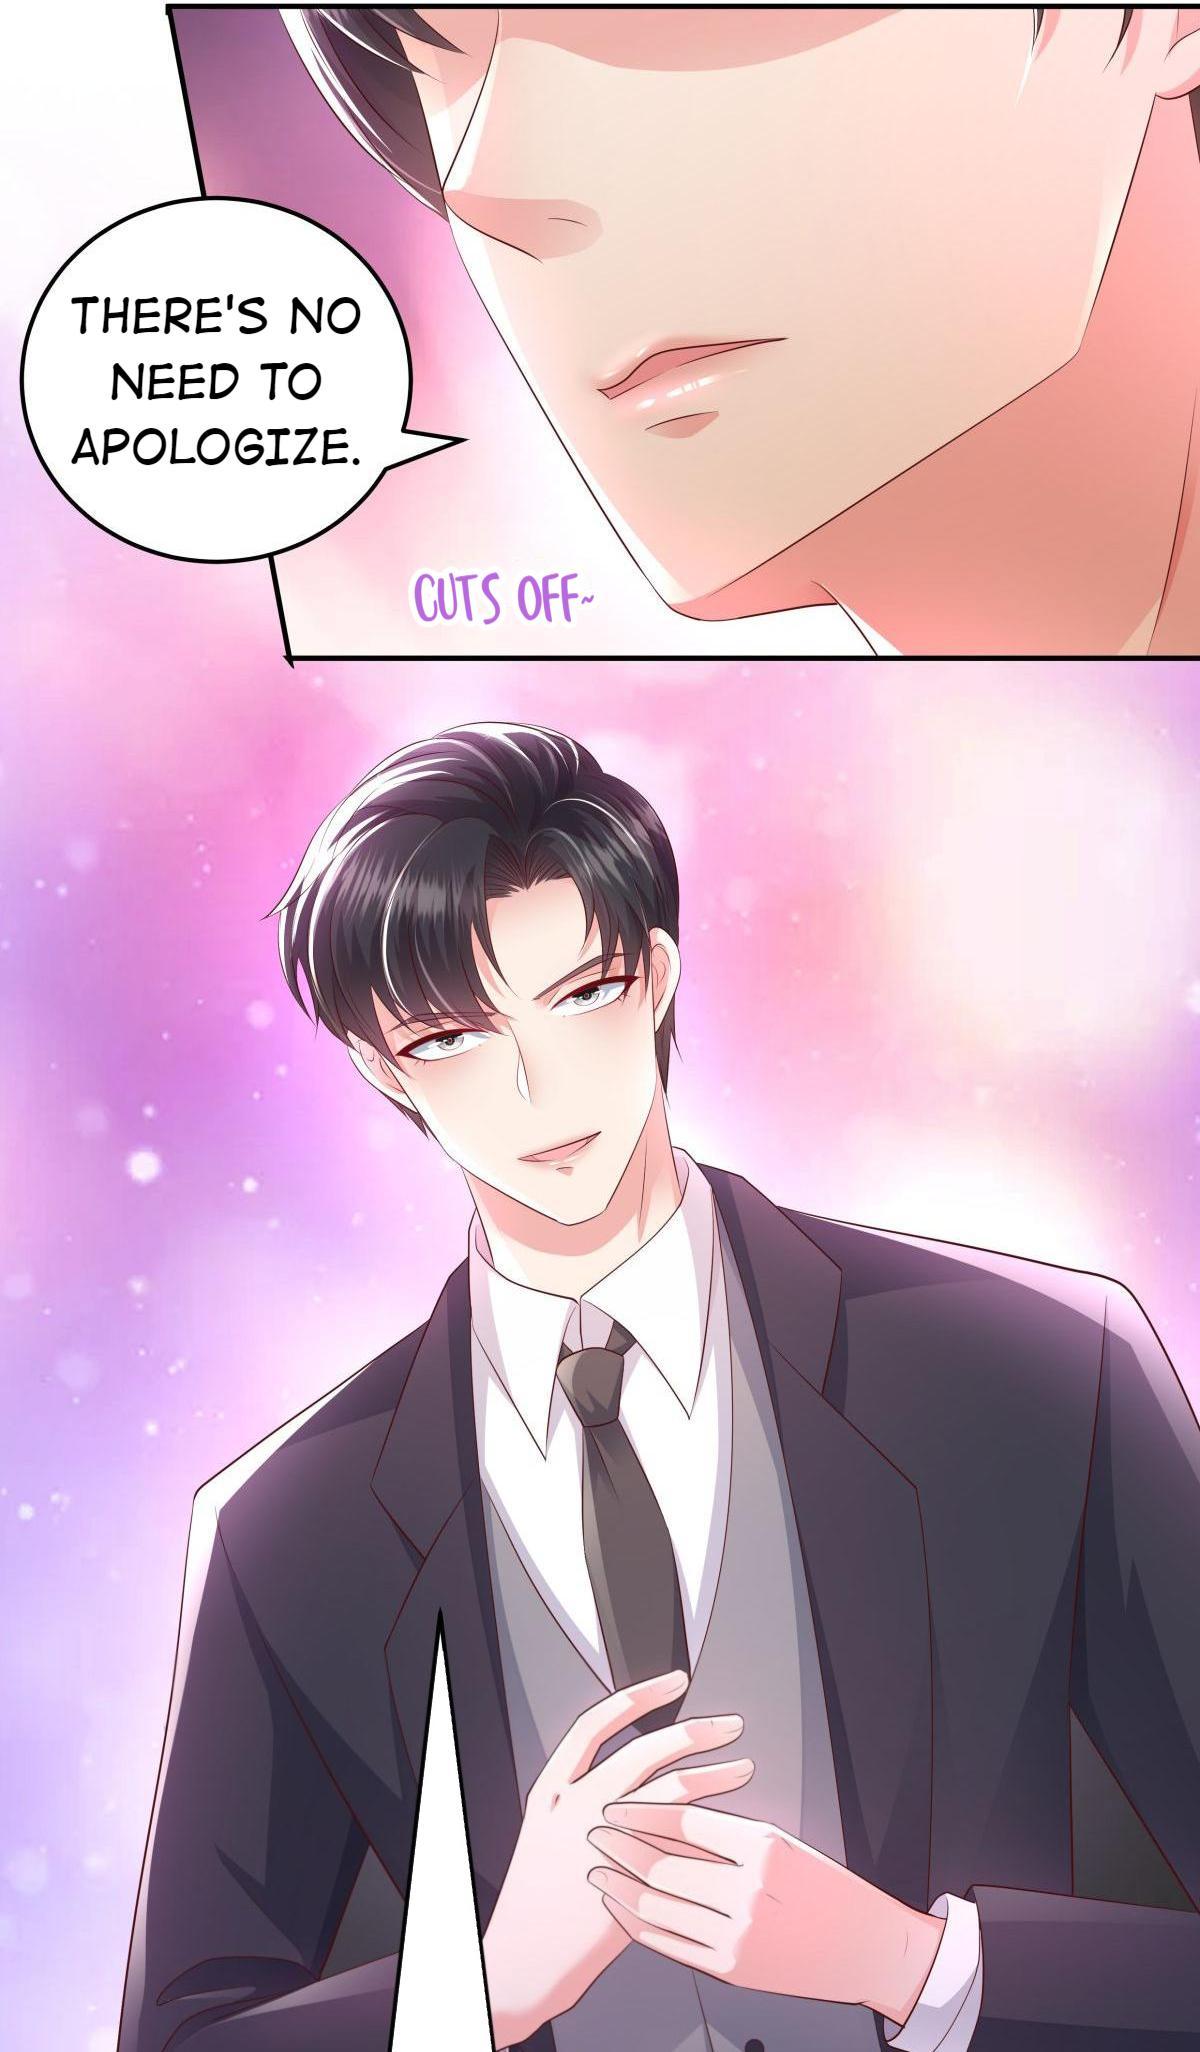 Rebirth Meeting: For You and My Exclusive Lovers chapter 20